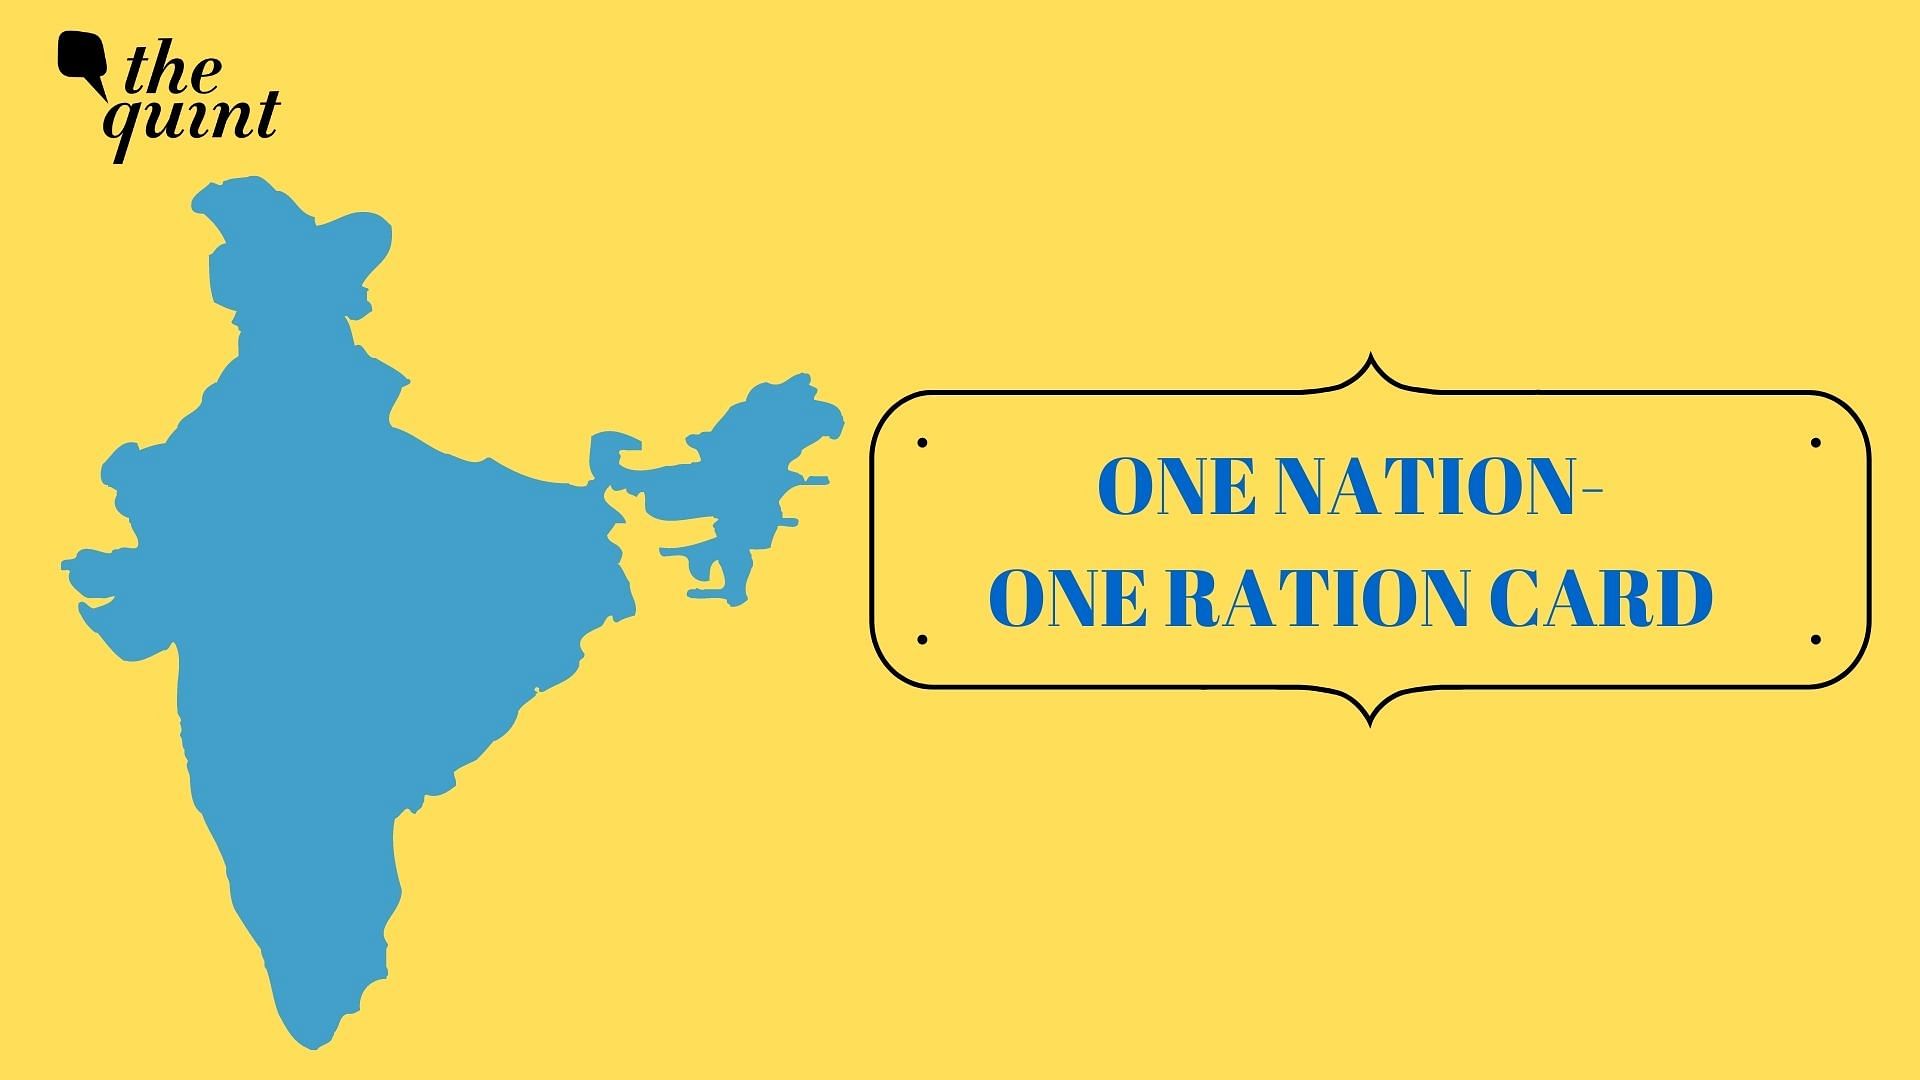 17 states have operationalised the “One Nation-One Ration Card” system, with Uttarakhand being the latest.